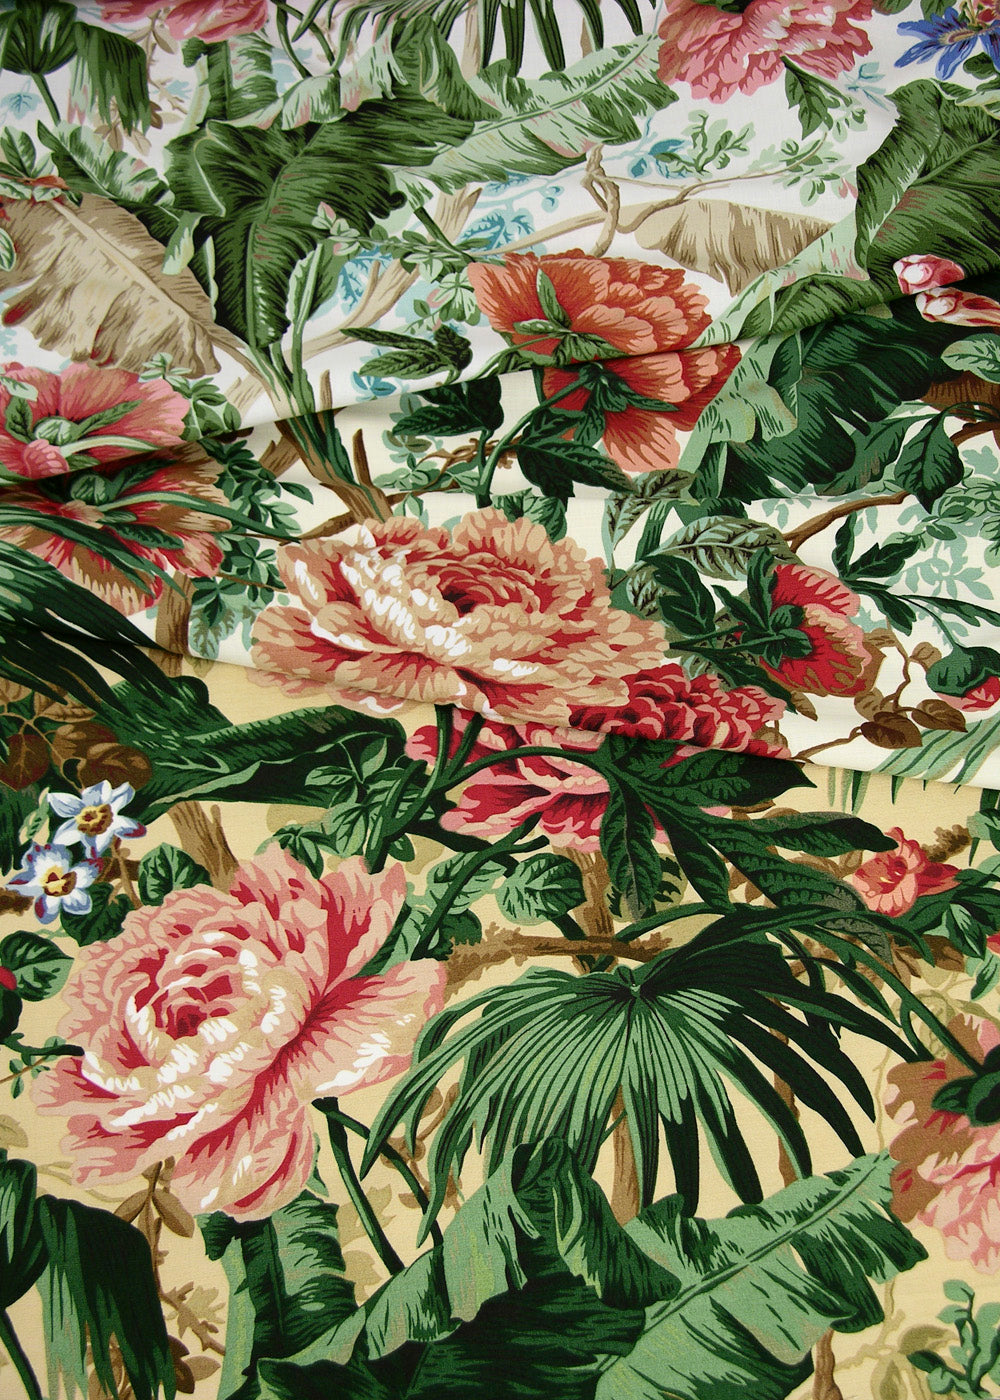 colorful printed fabric with flowers and tropical leaves